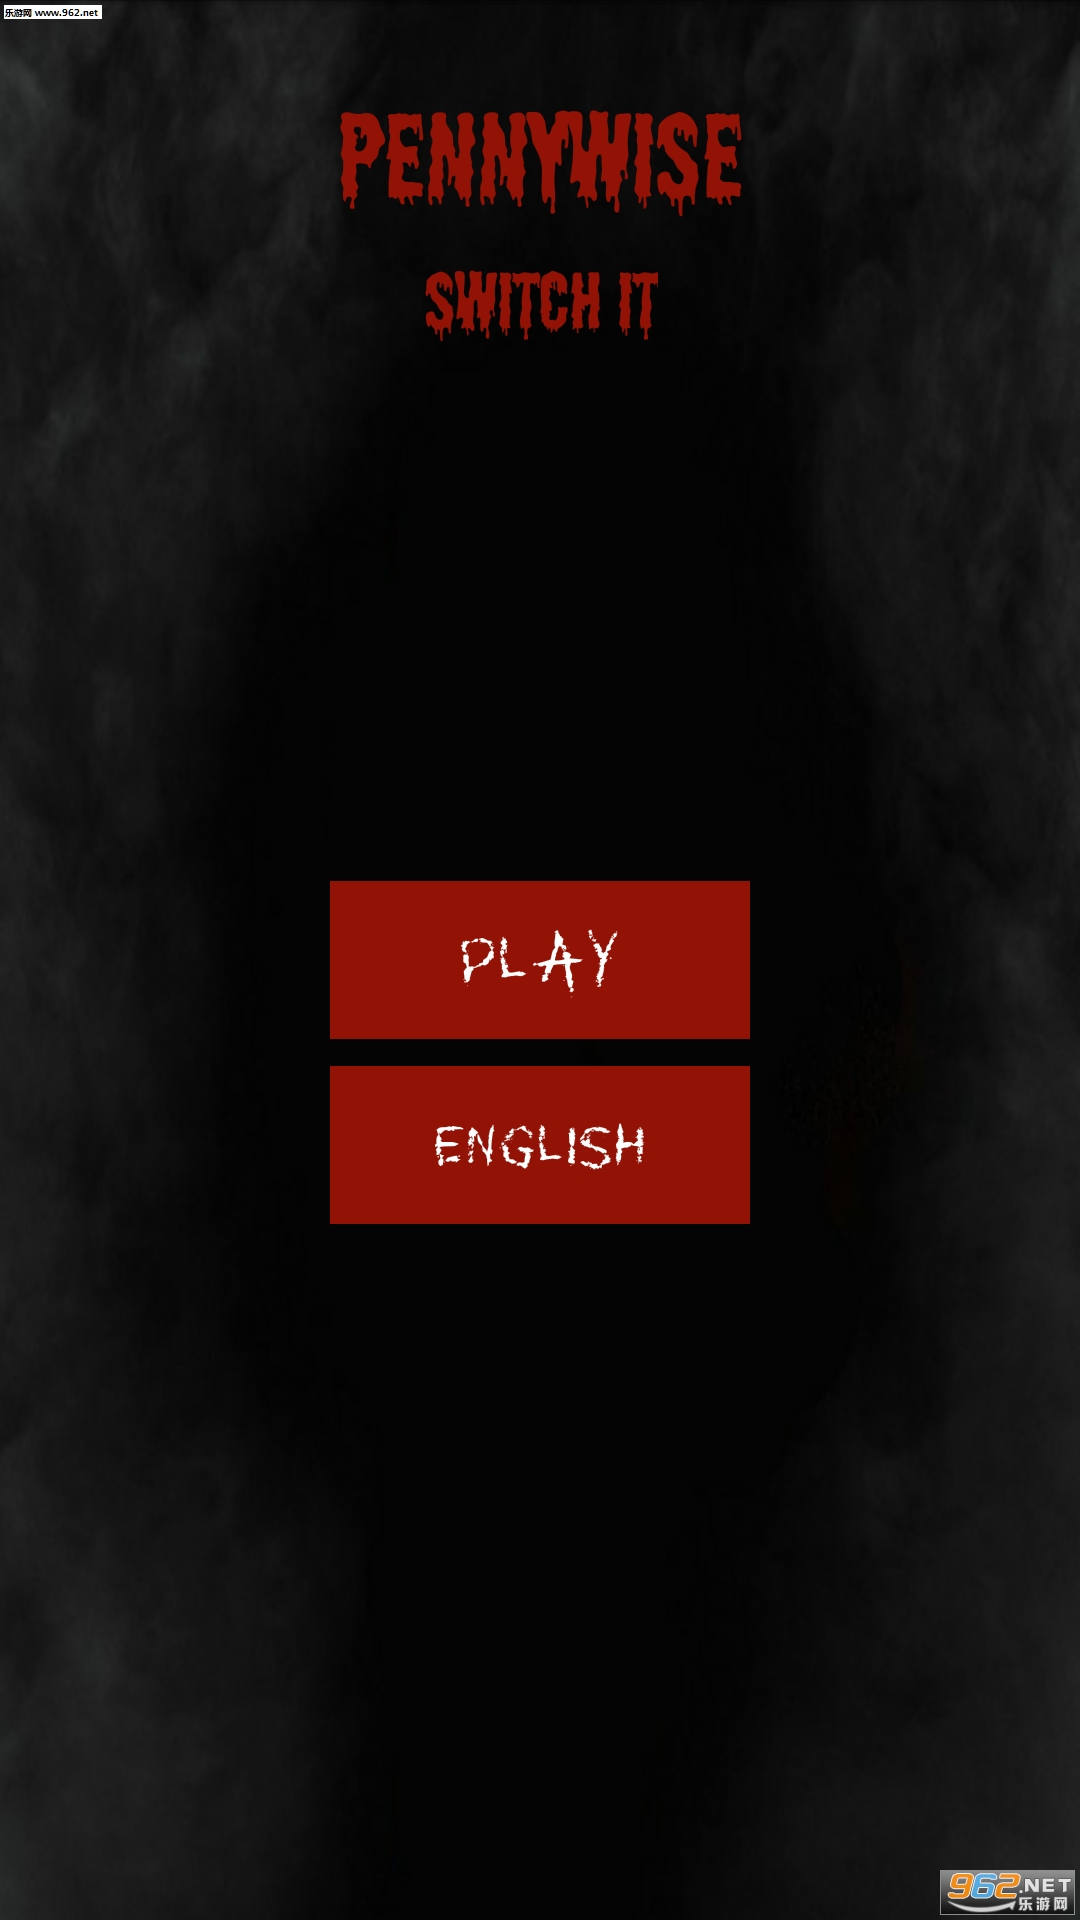 Pennywise Switch IT(ѰСϷ)v1.8ͼ4